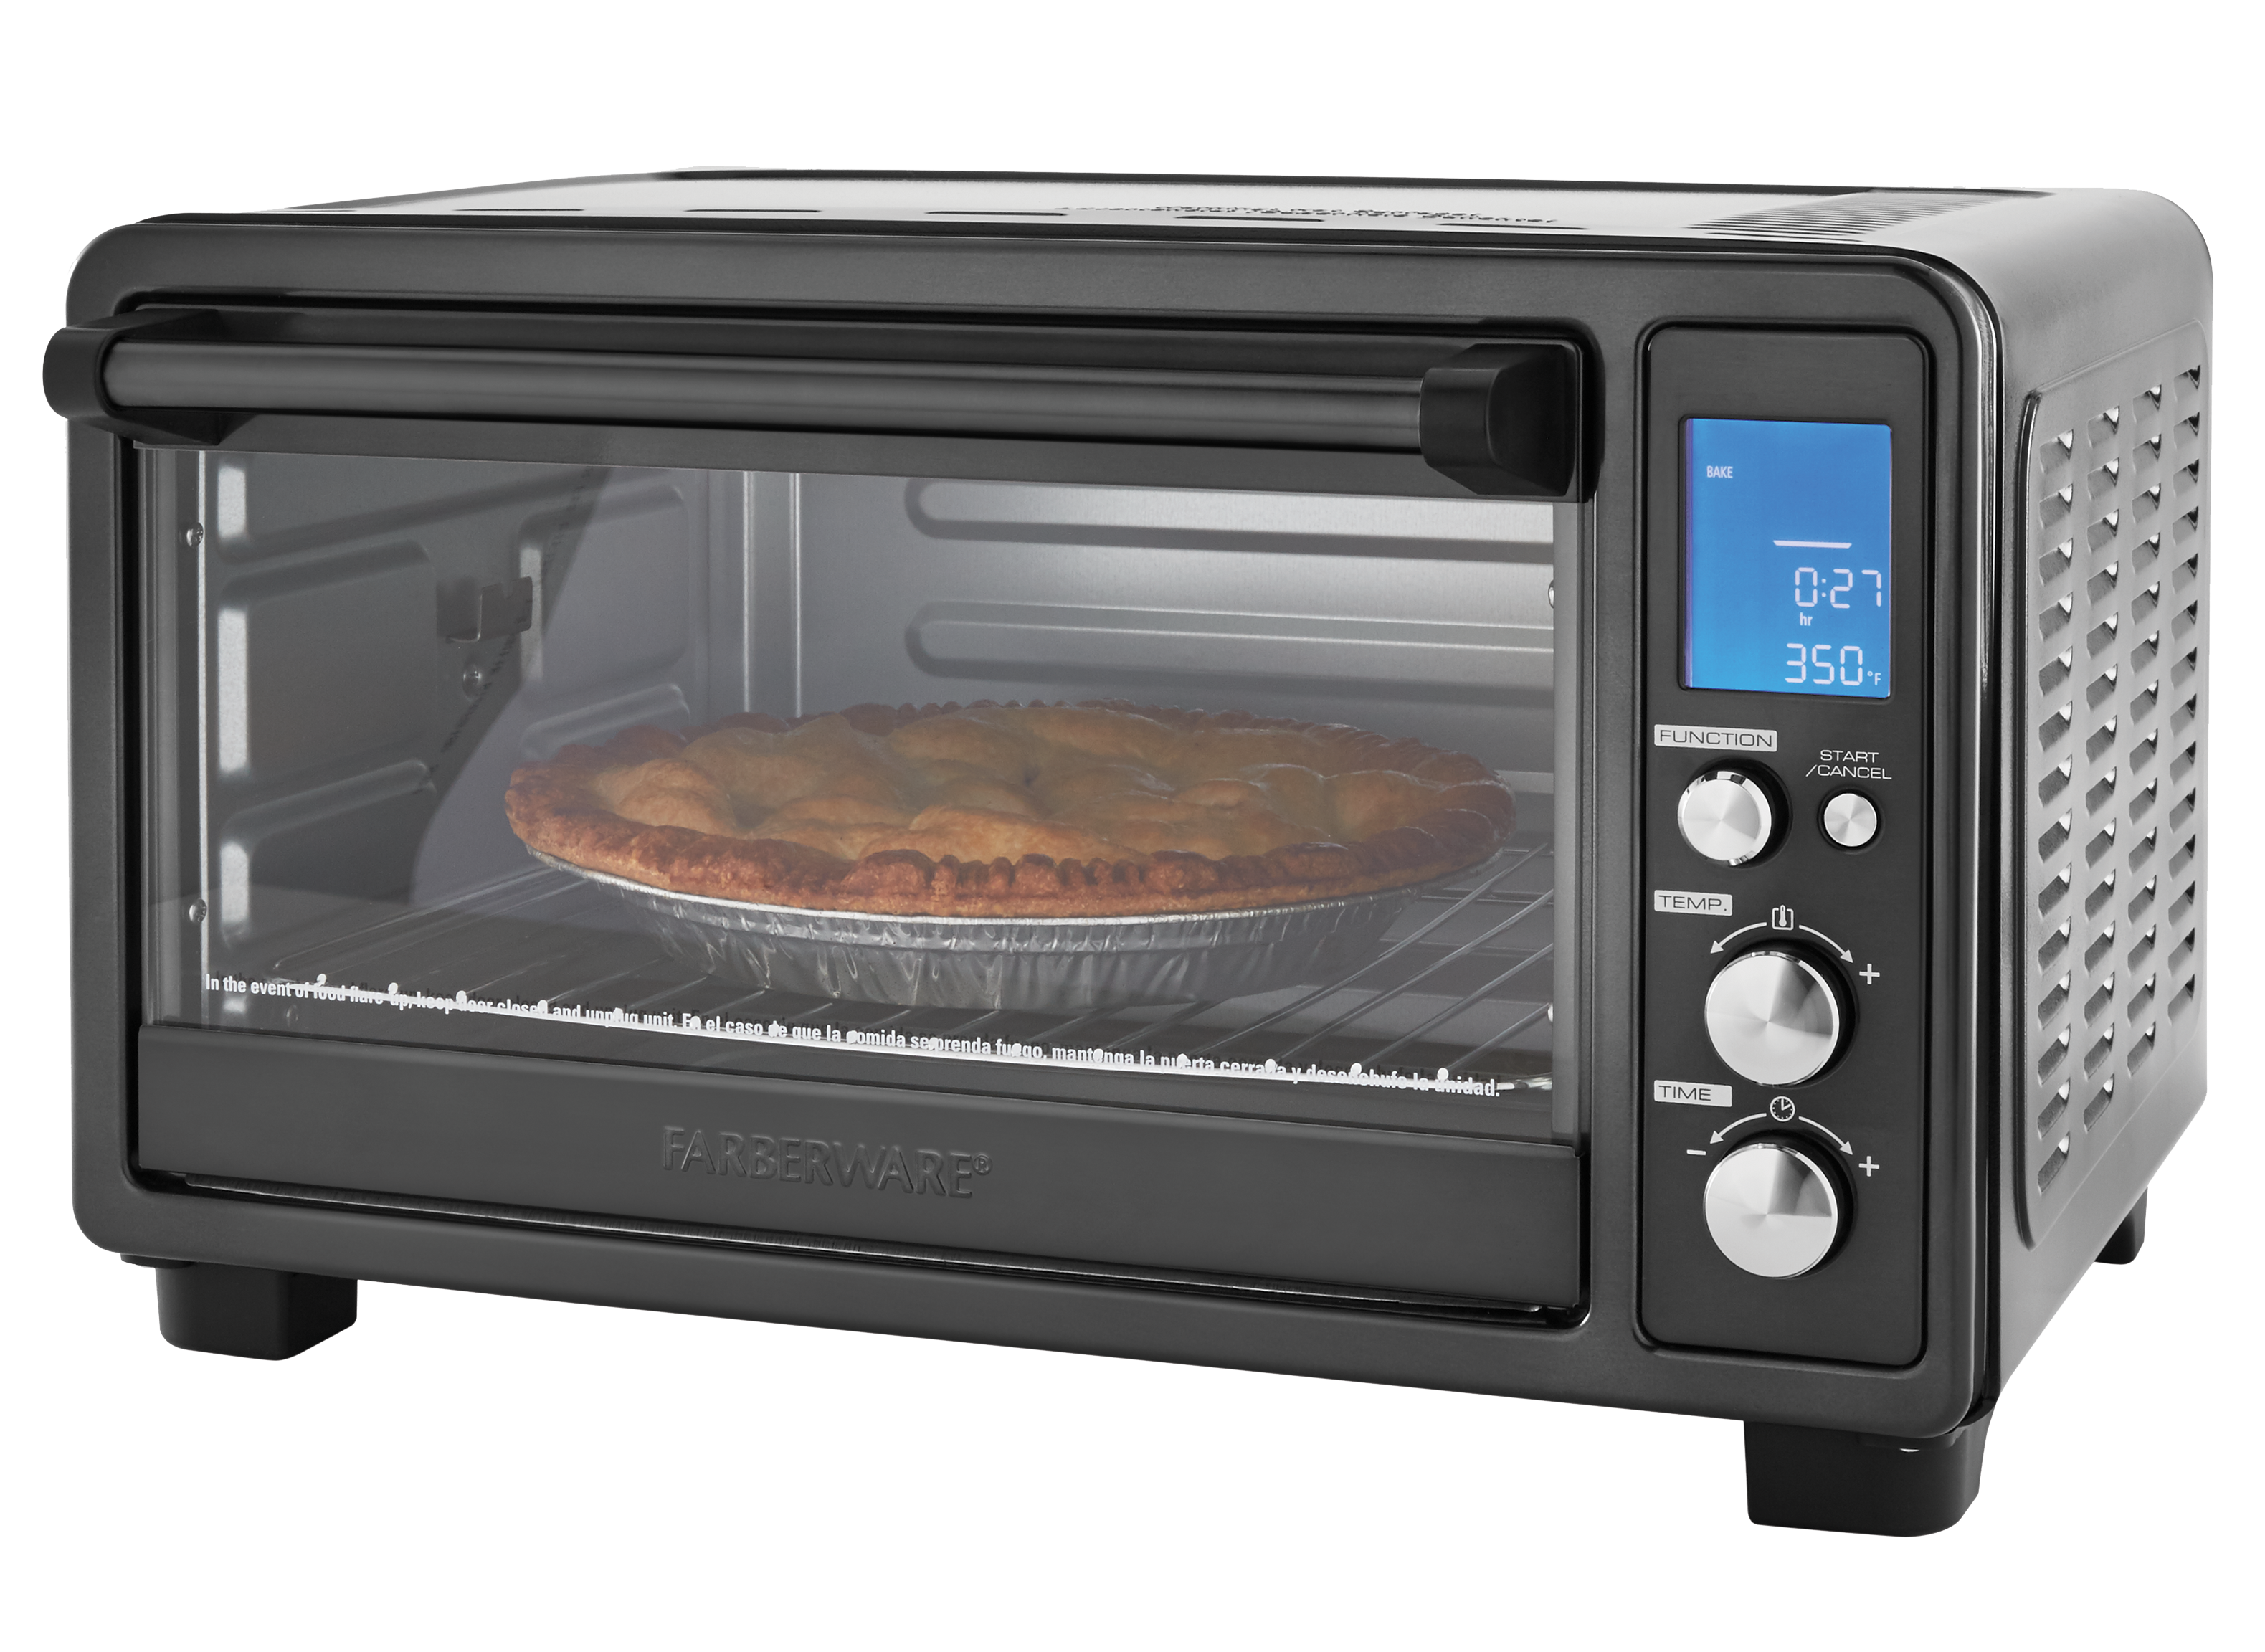 https://crdms.images.consumerreports.org/prod/products/cr/models/395996-toaster-ovens-farberware-black-stainless-ac25cwm-10002566.png